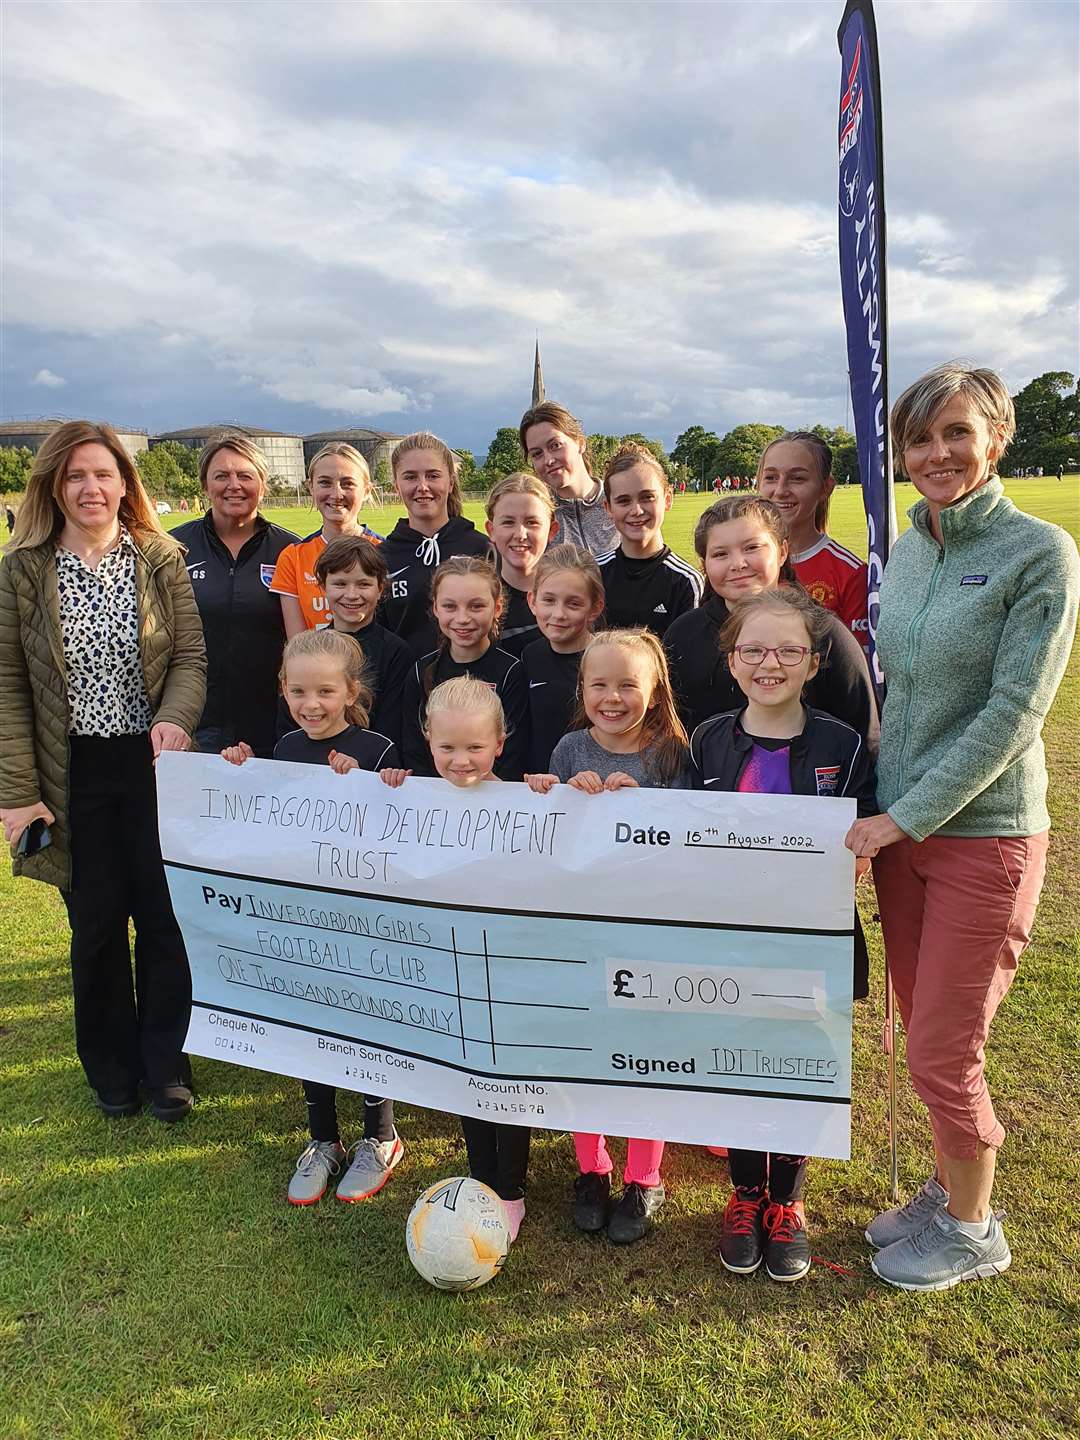 The women's football group also received £1,000.